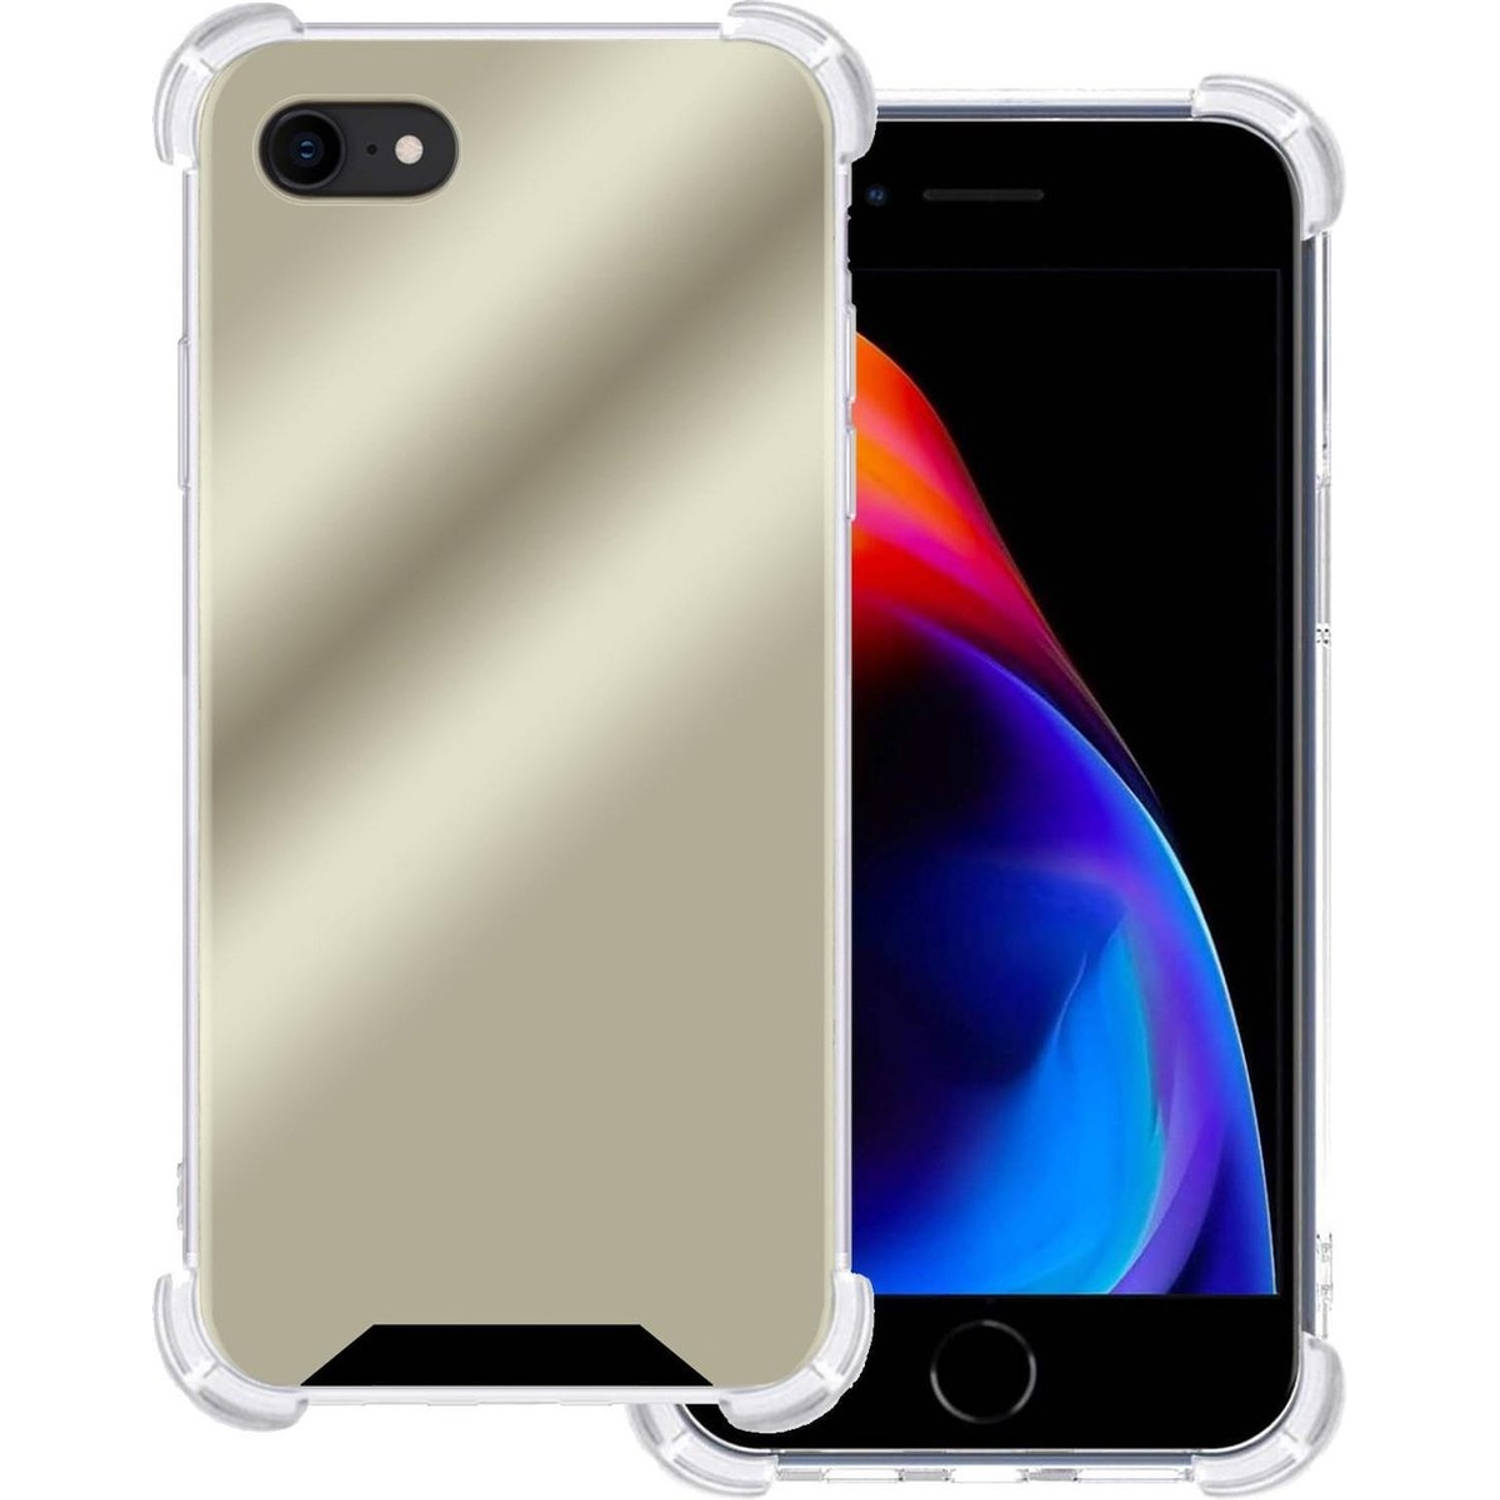 Basey Apple Iphone 7 Hoesje Siliconen Shock Proof Hoes Case Cover Goud